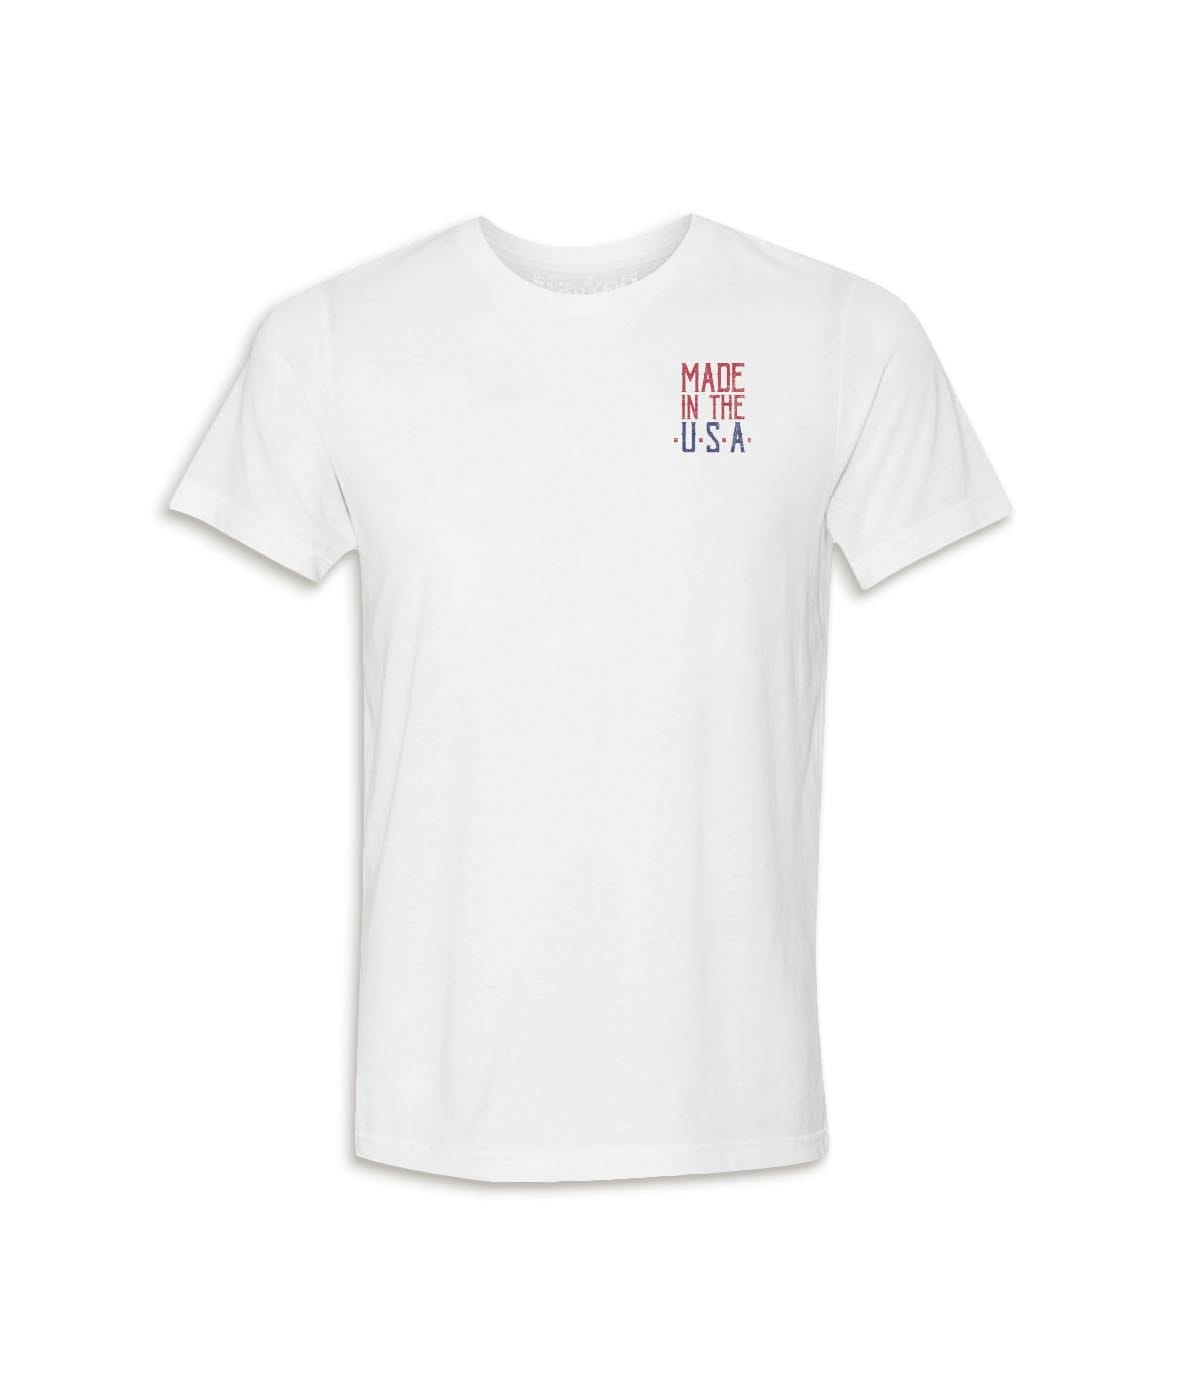 Men's Ridiculously Soft Lightweight Tee | Made in the USA | Super Soft Graphic Tshirts. - Nayked Apparel